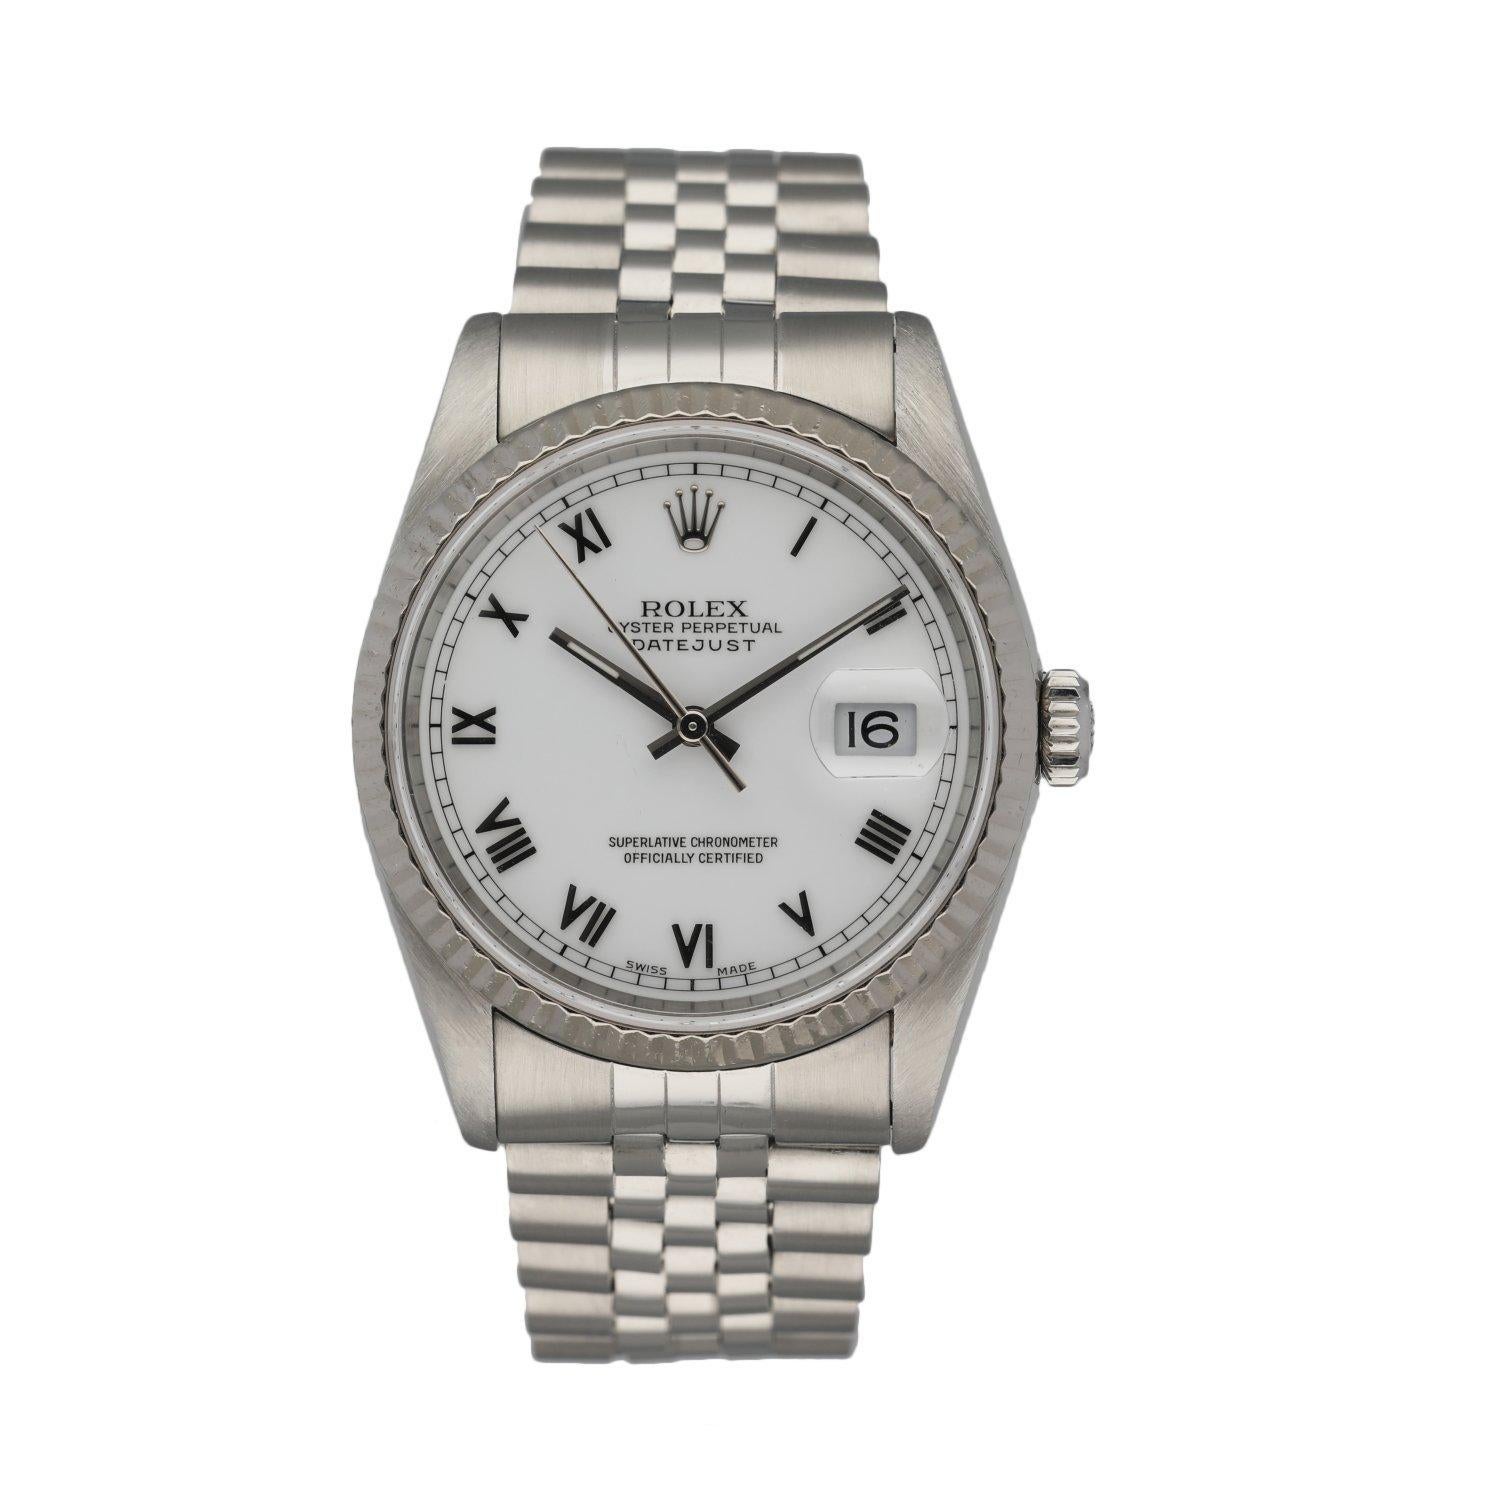 Rolex Datejust 16234 White Dial Men's Watch at 1stDibs